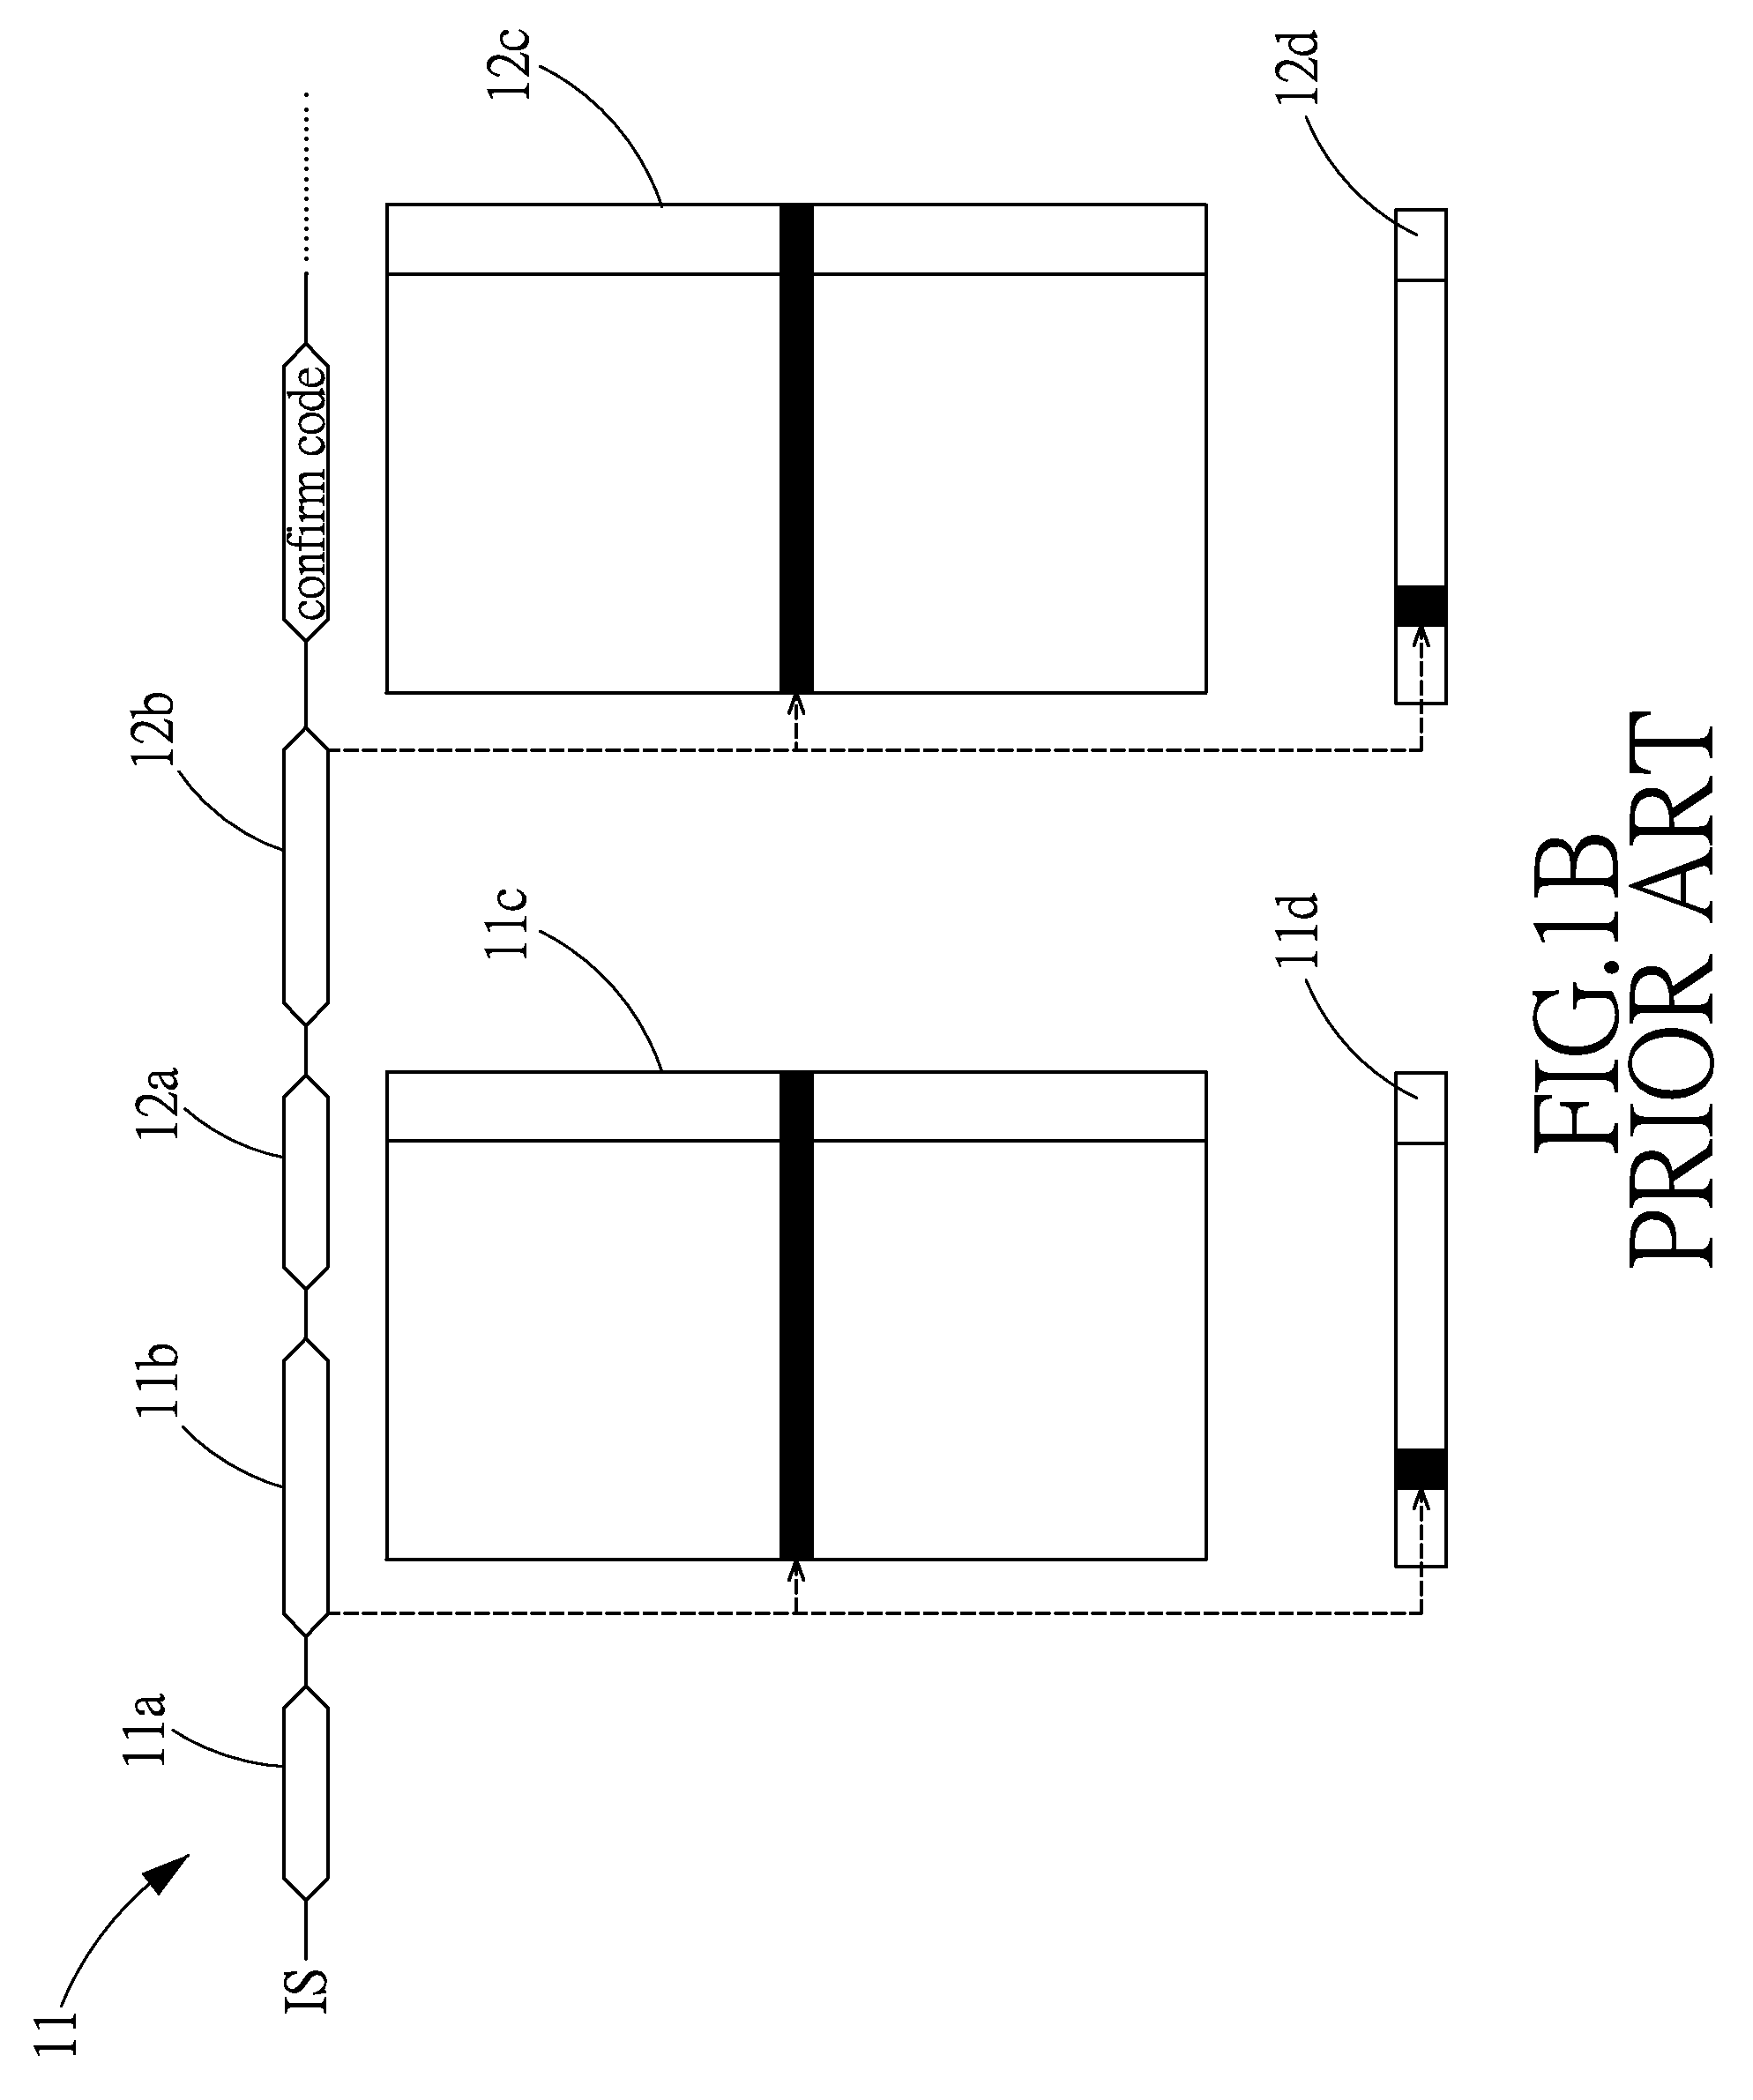 Simultaneously accessible memory device and method for using the same